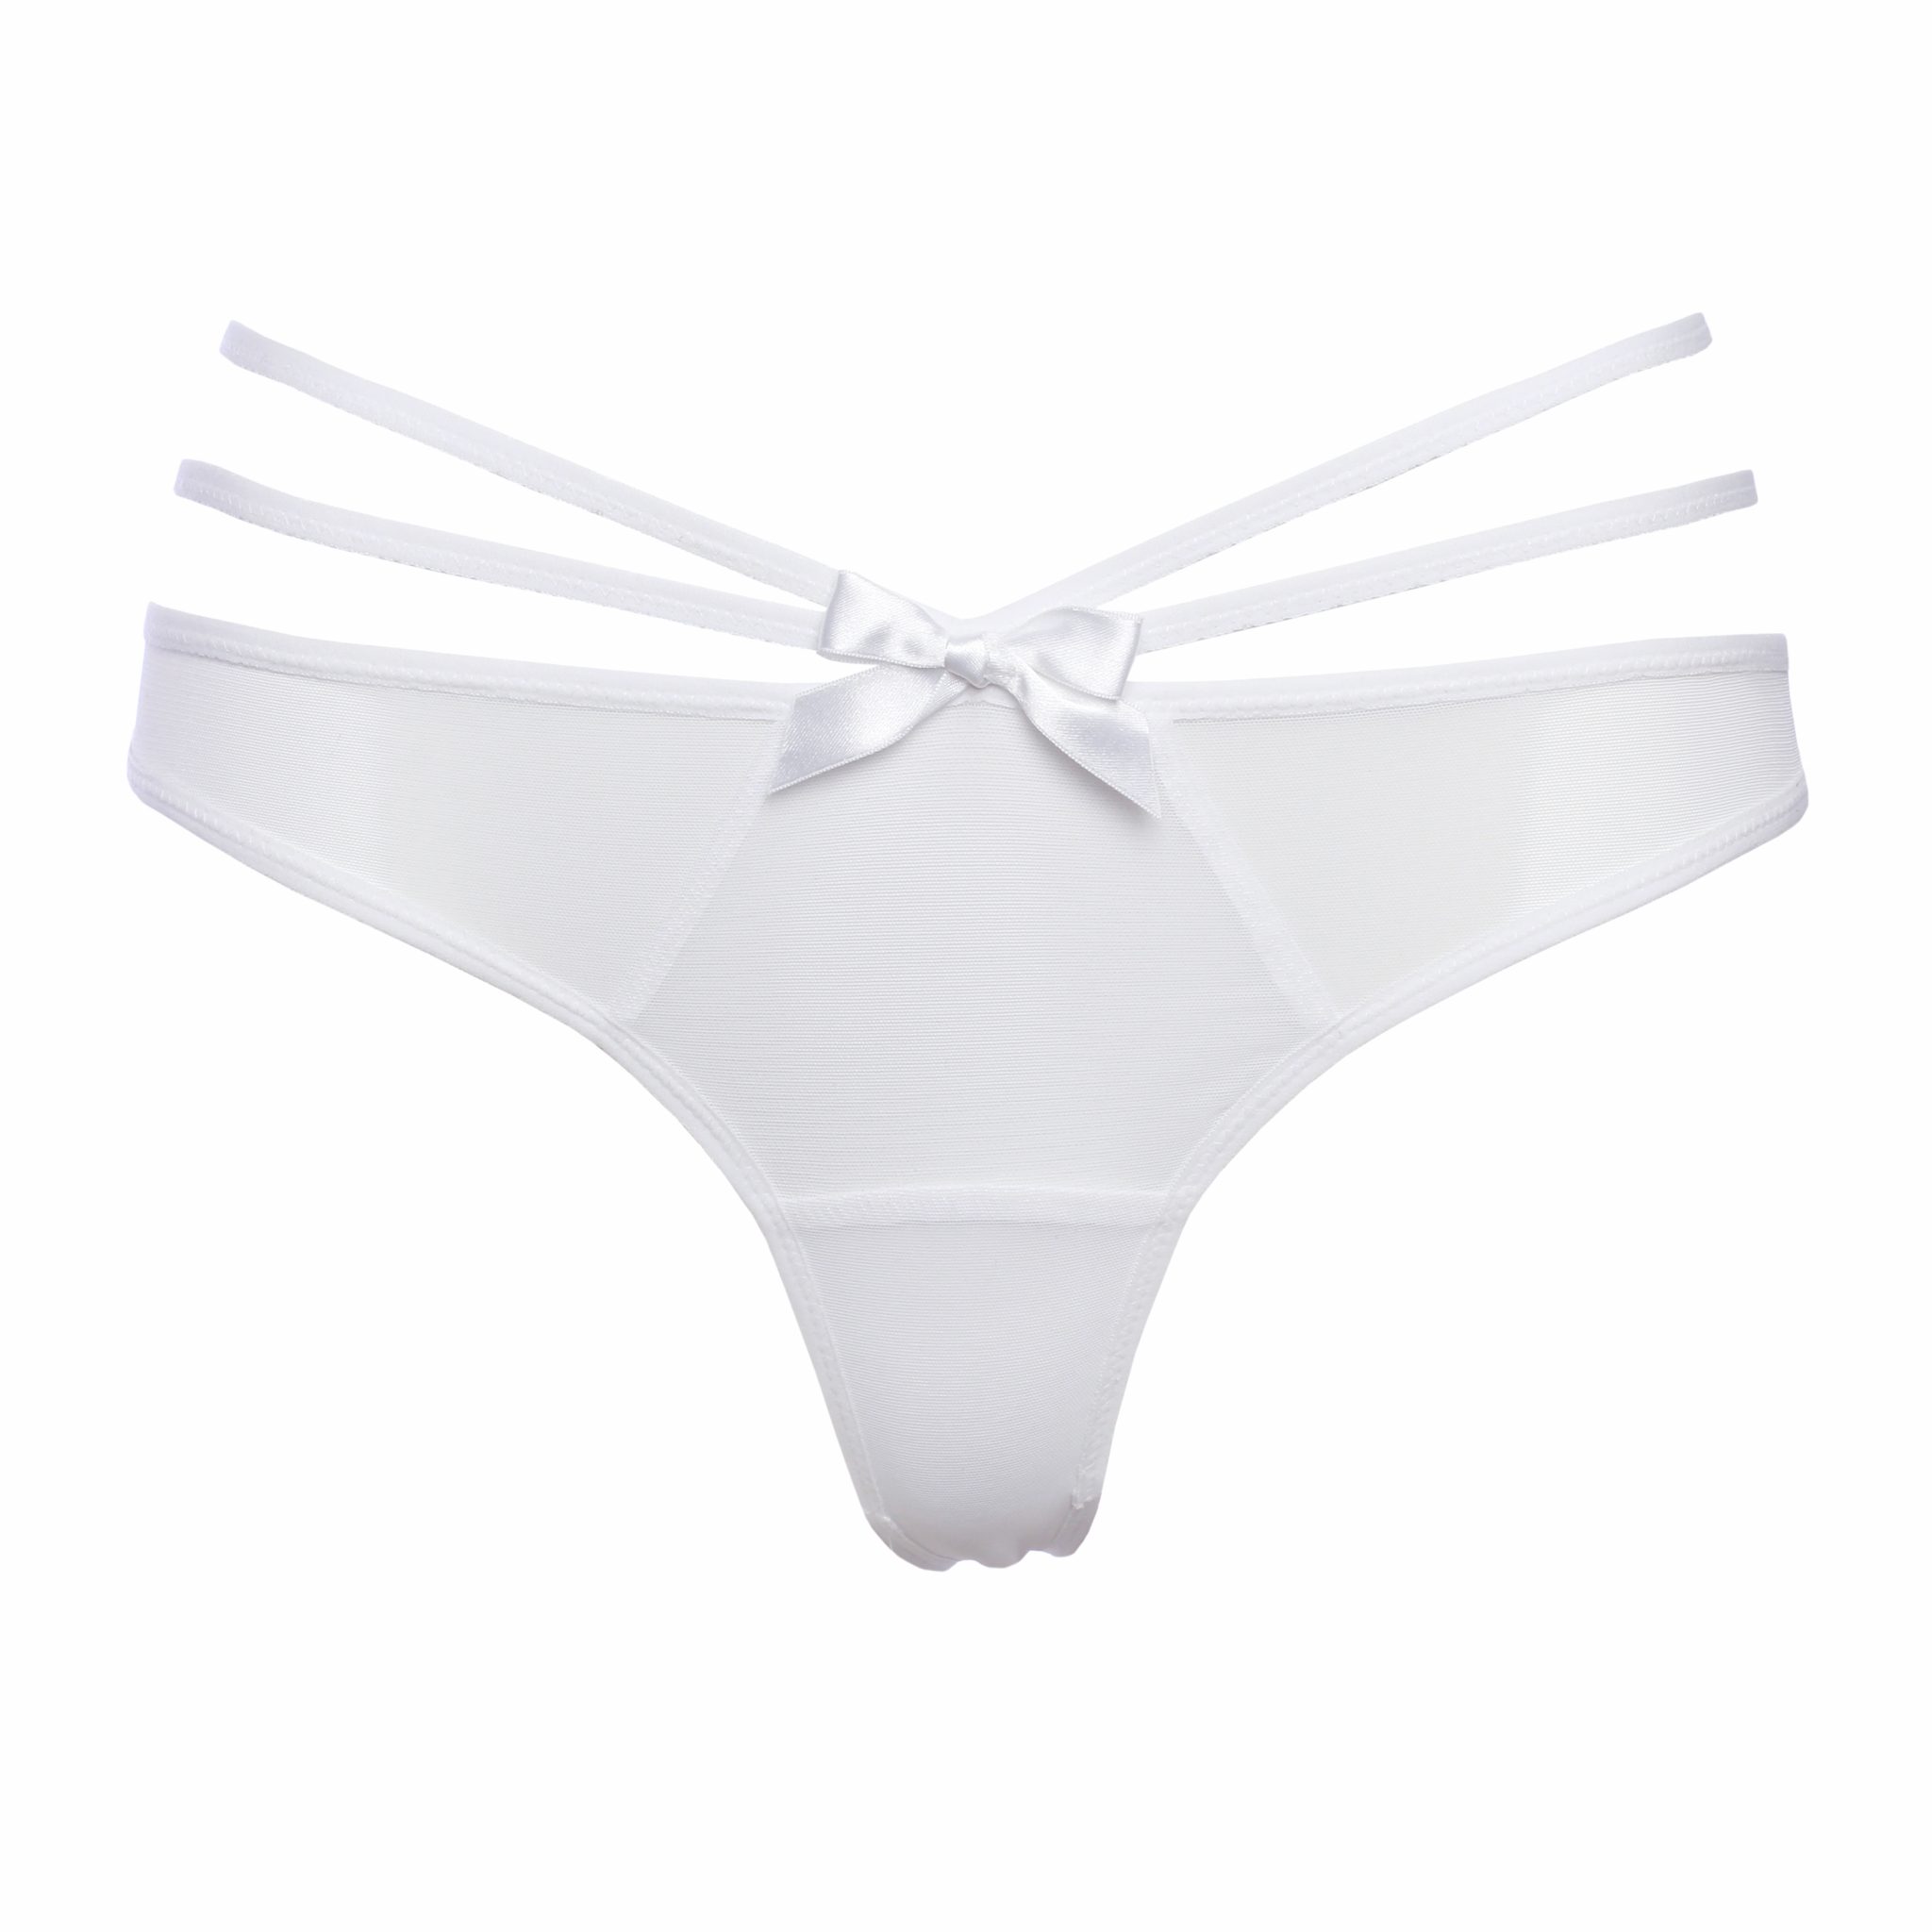 White Mesh Low Cut Panties With Decorative Straps by Flash you and me